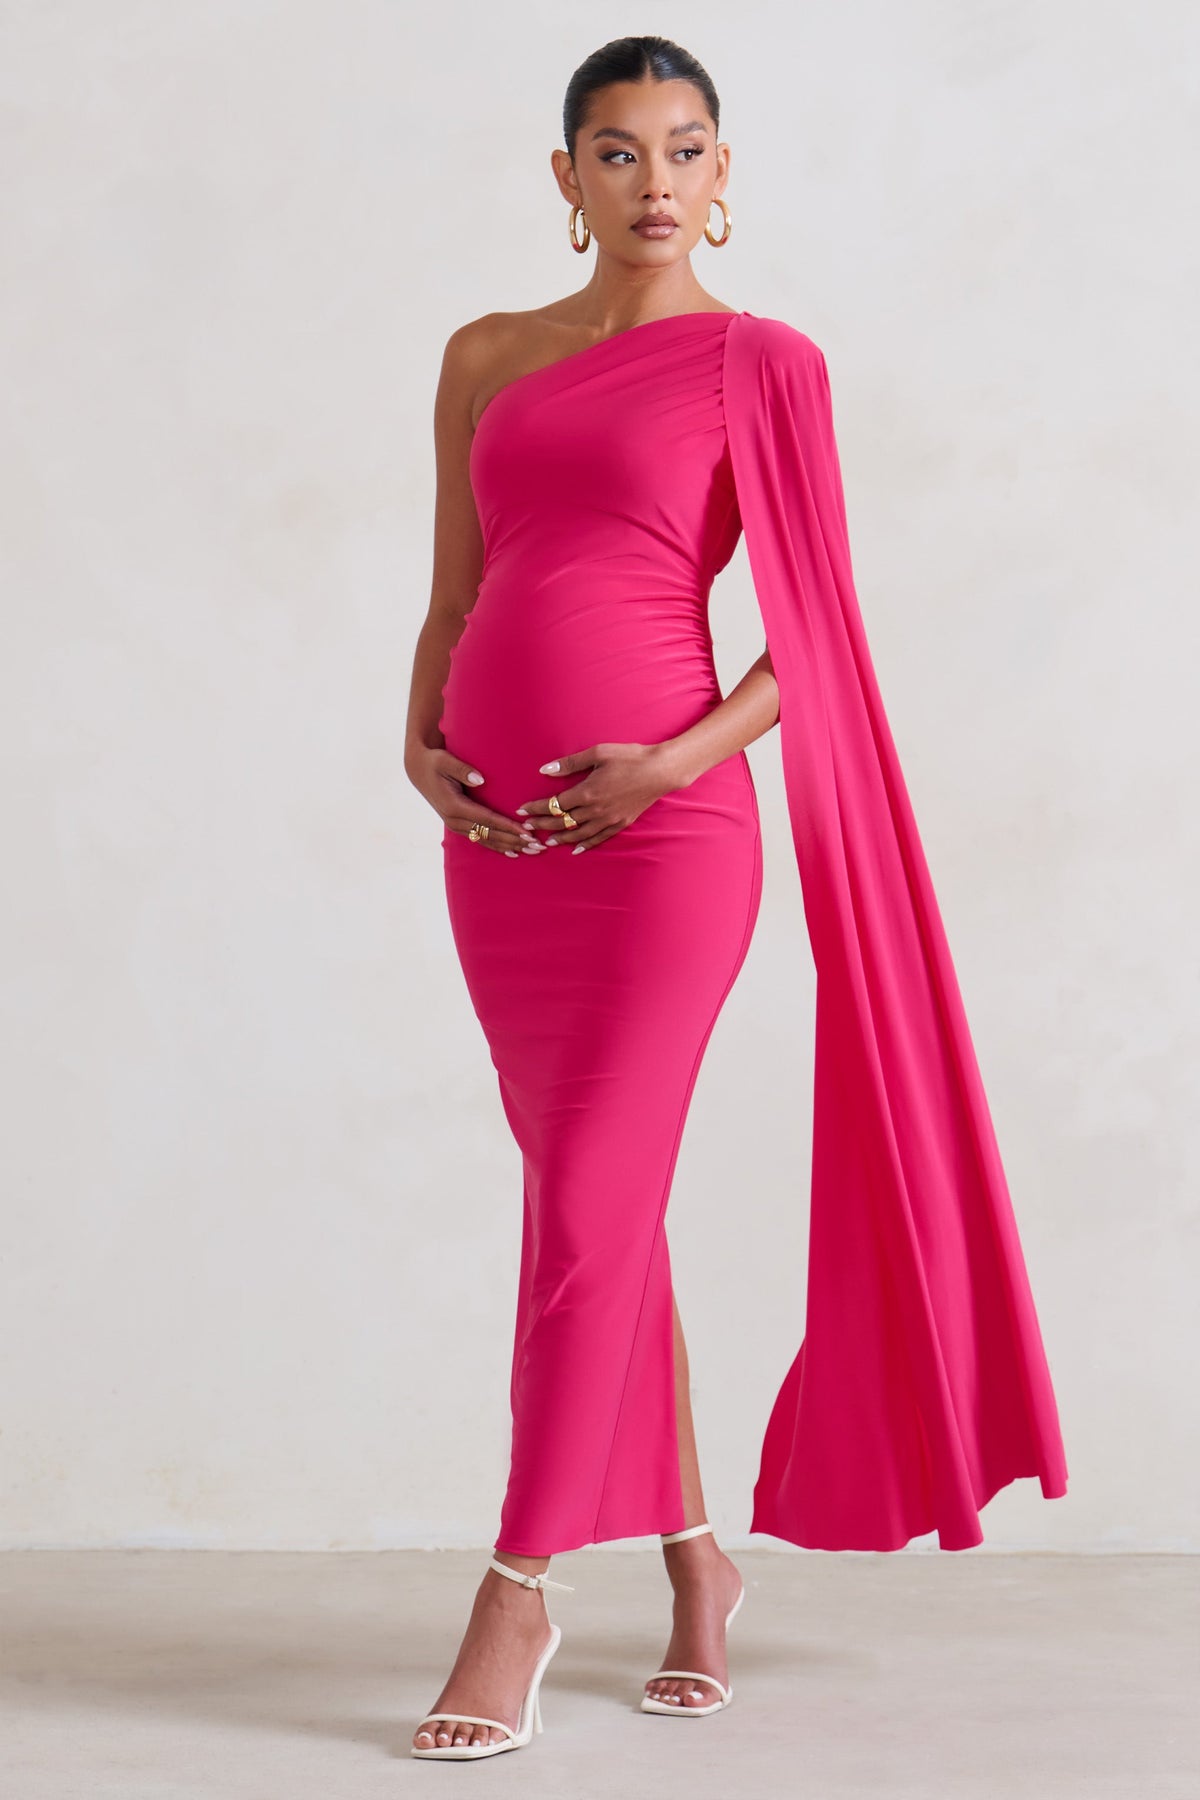 Pink Tie Dye Maternity Delivery Gown - Sexy Mama Maternity